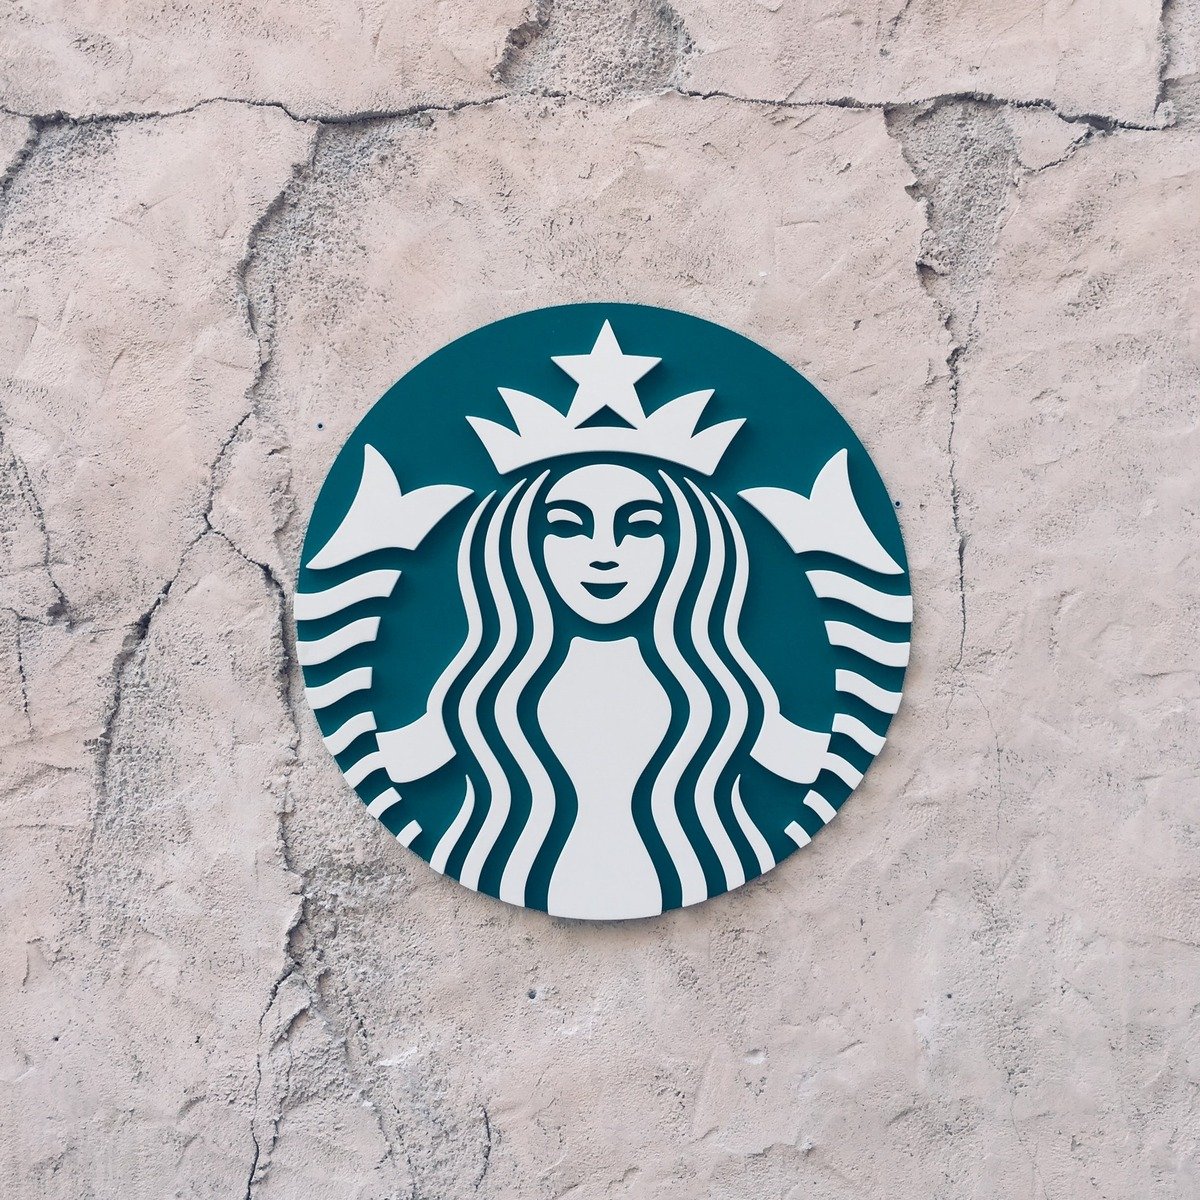 close up of starbucks logo on cracked wall